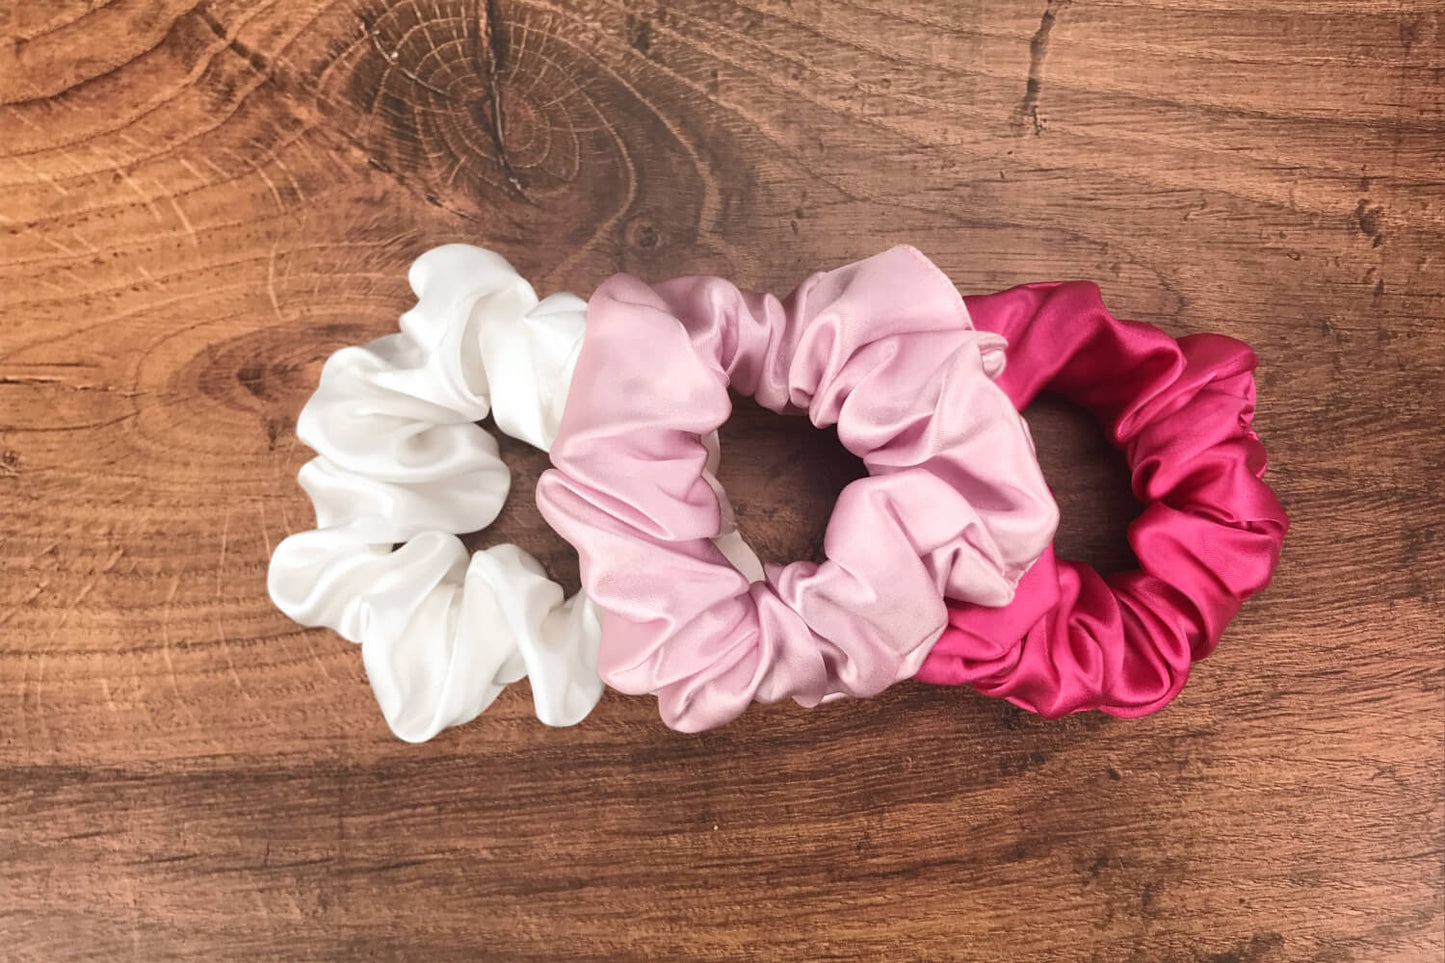 Large soft pink hot pink and white silk hair ties by Celestial Silk laying in a pile on a wood vanity